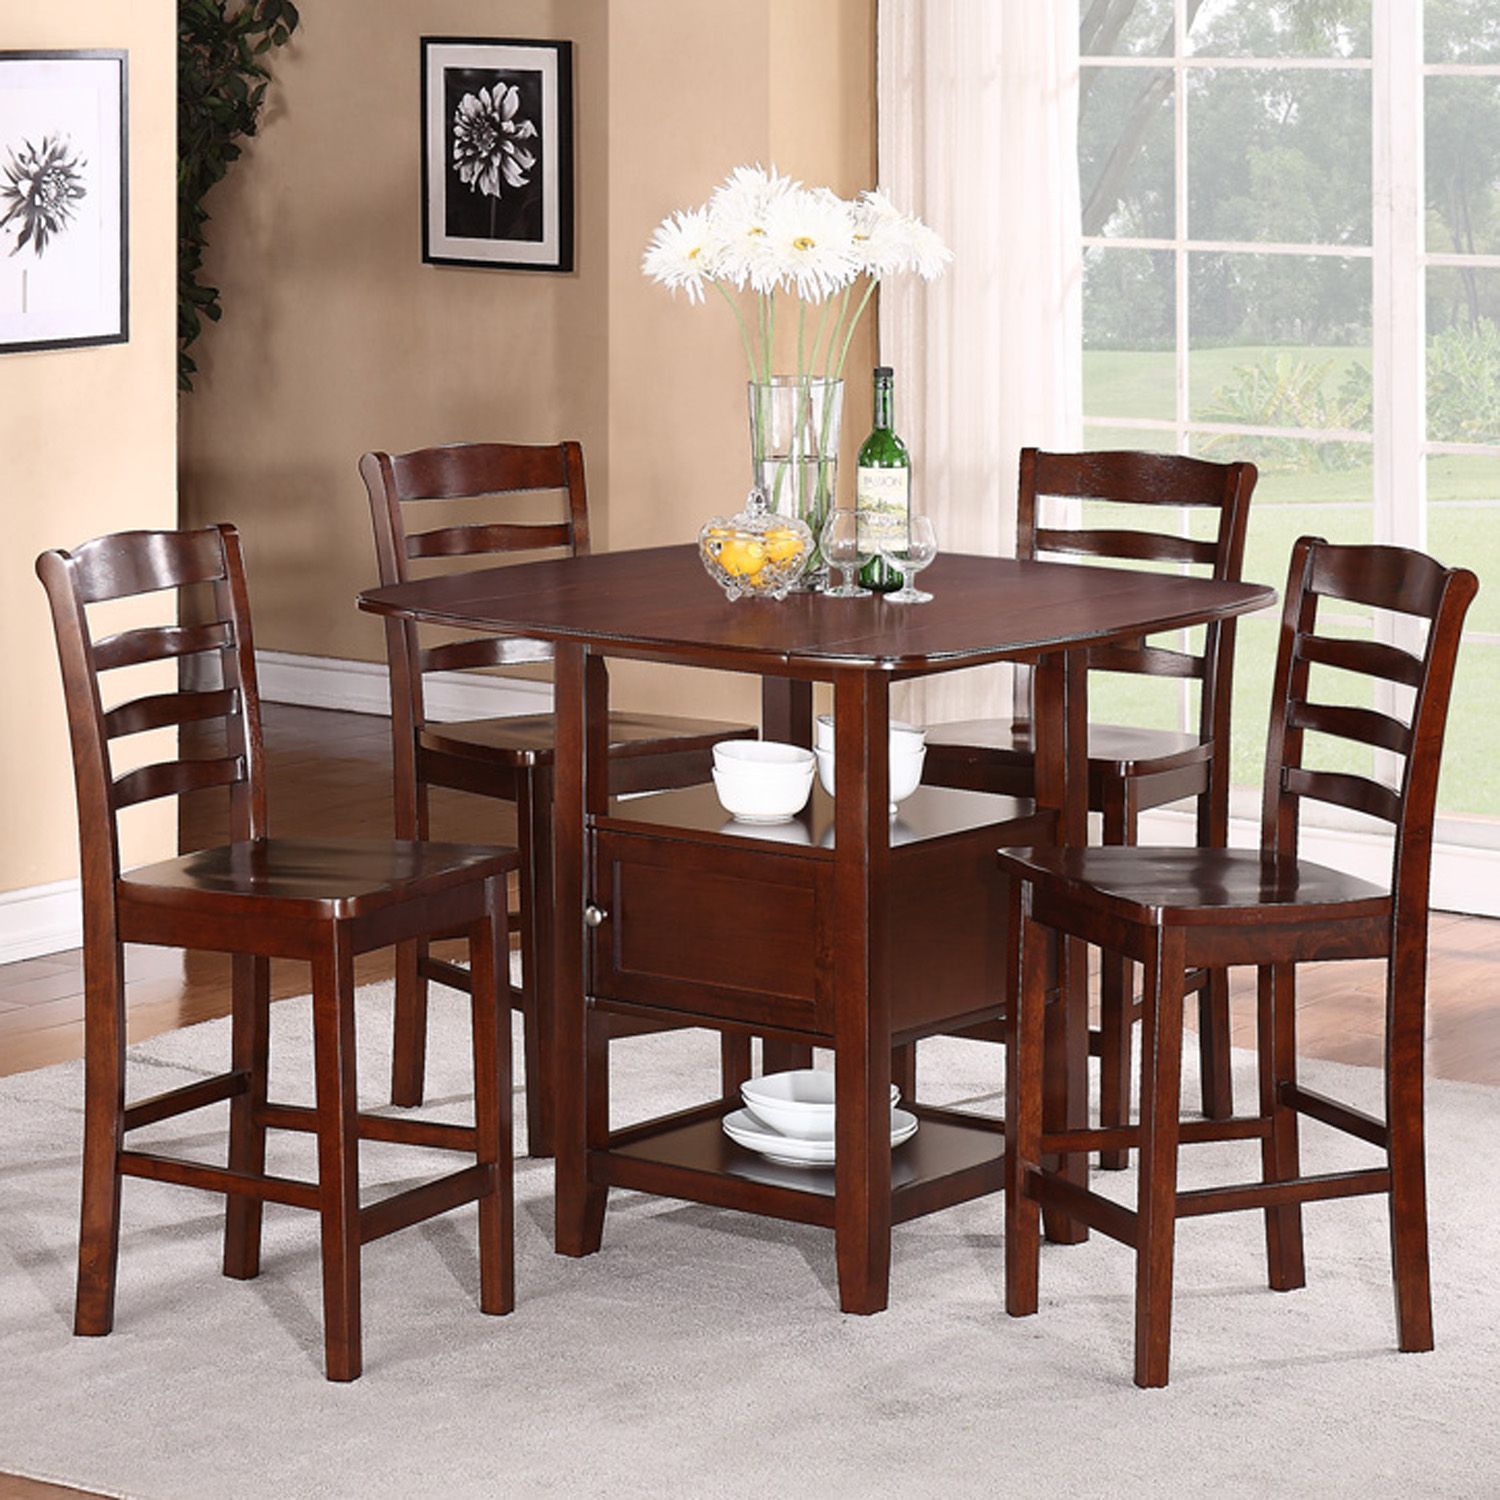 dining table and chairs 5pc dining set with storage ERNLNYJ